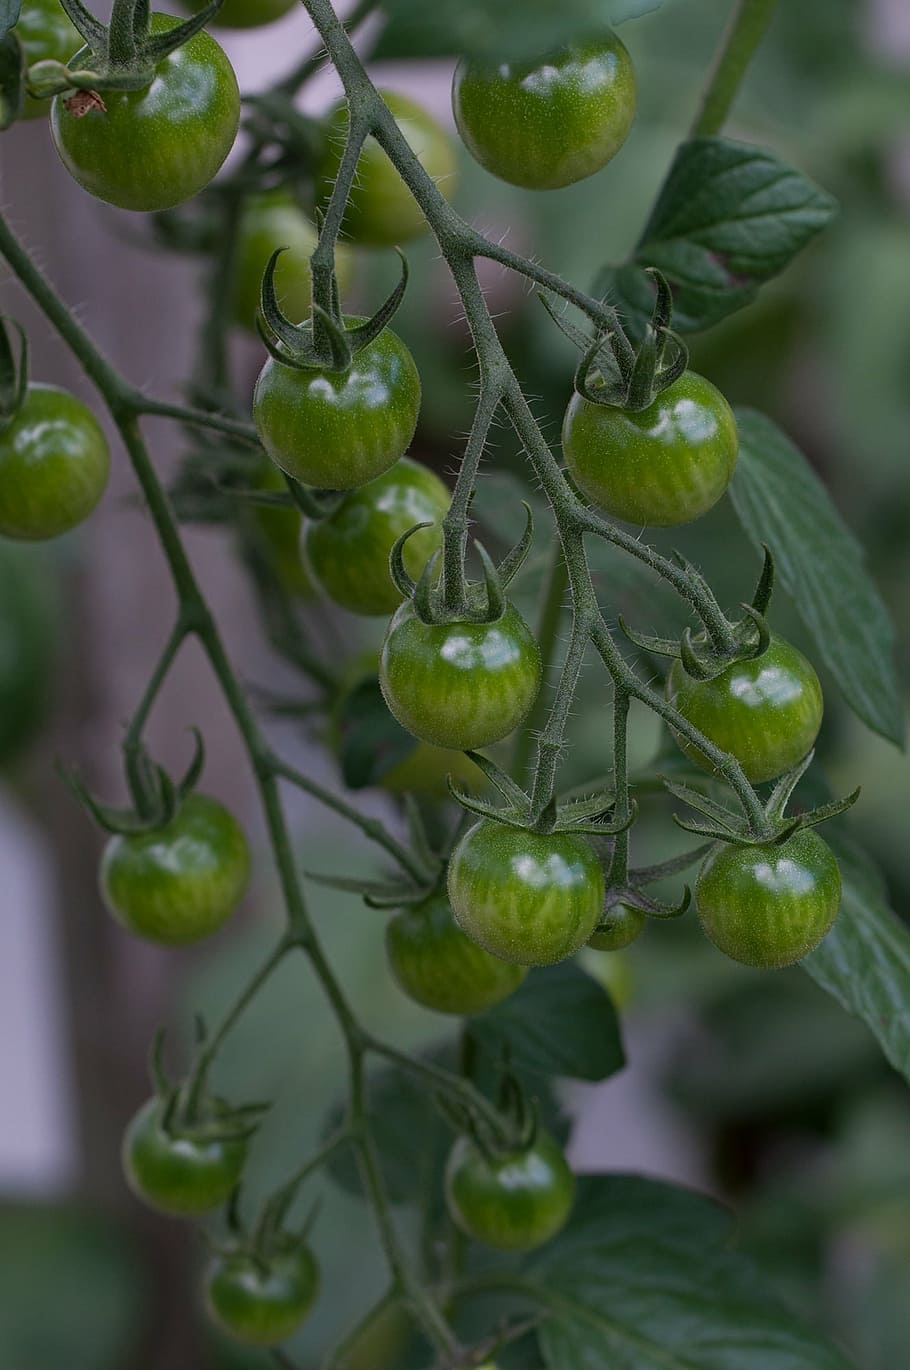 tomatoes, trusses, green, immature, immaturity fruit, fruits